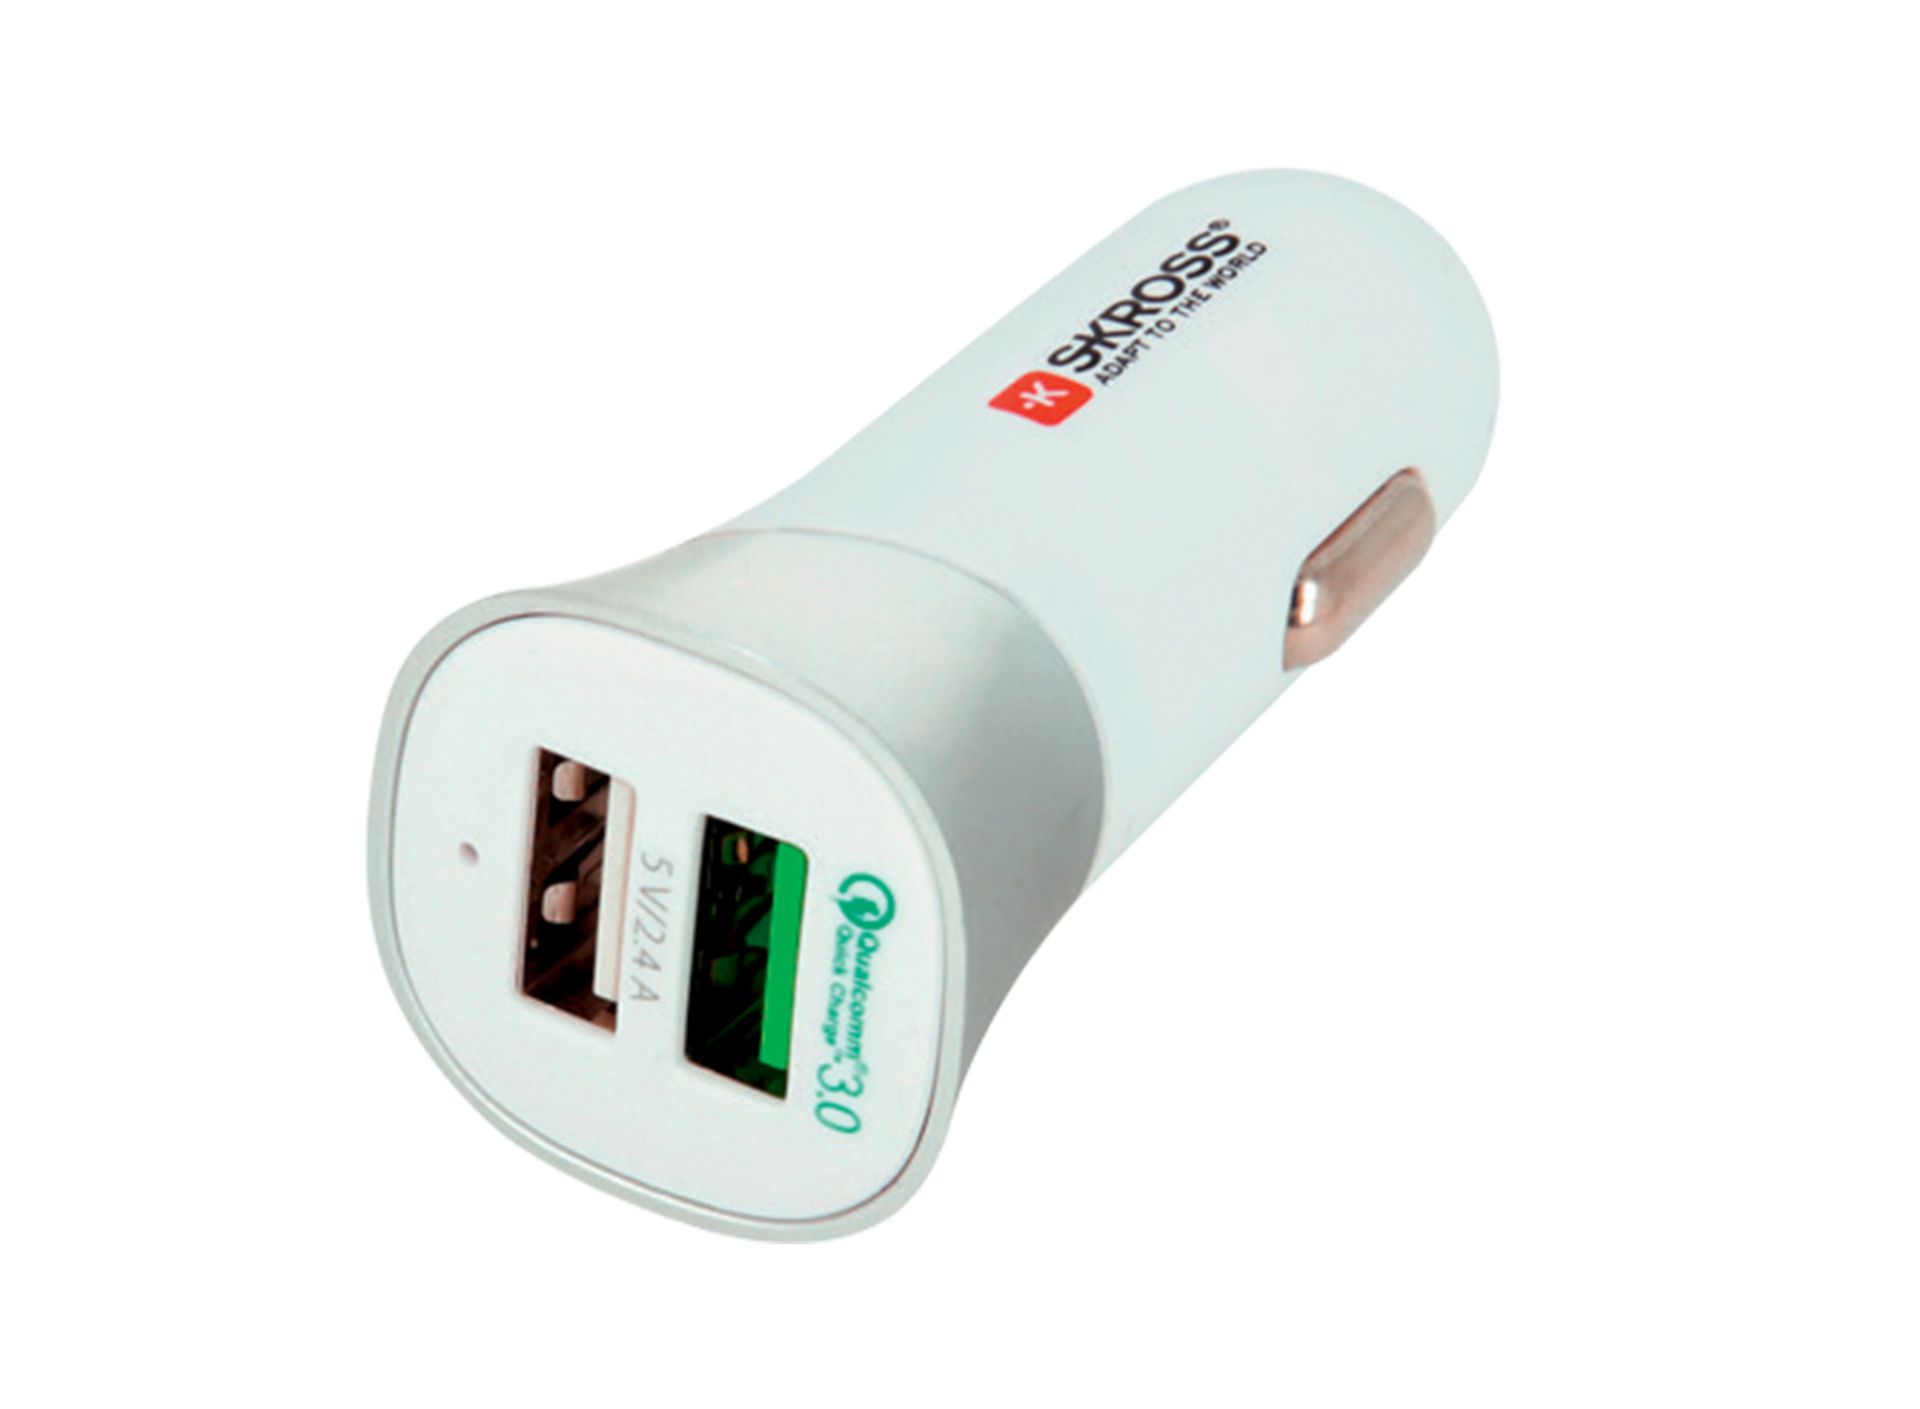 Skross USB Car Charger Quick charge 2.0 angled